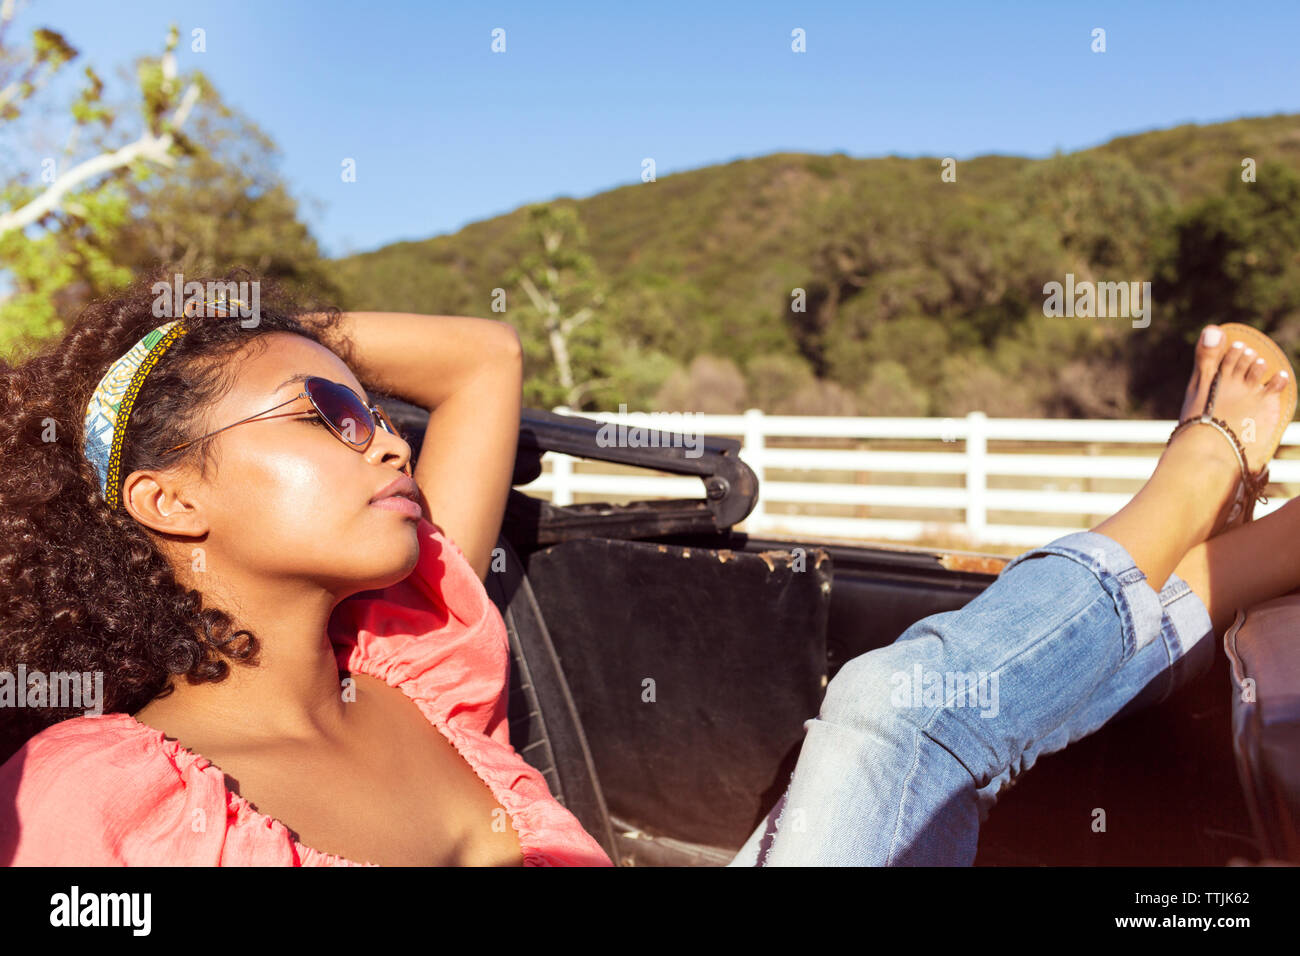 Woman relaxing while sitting in convertible car Banque D'Images